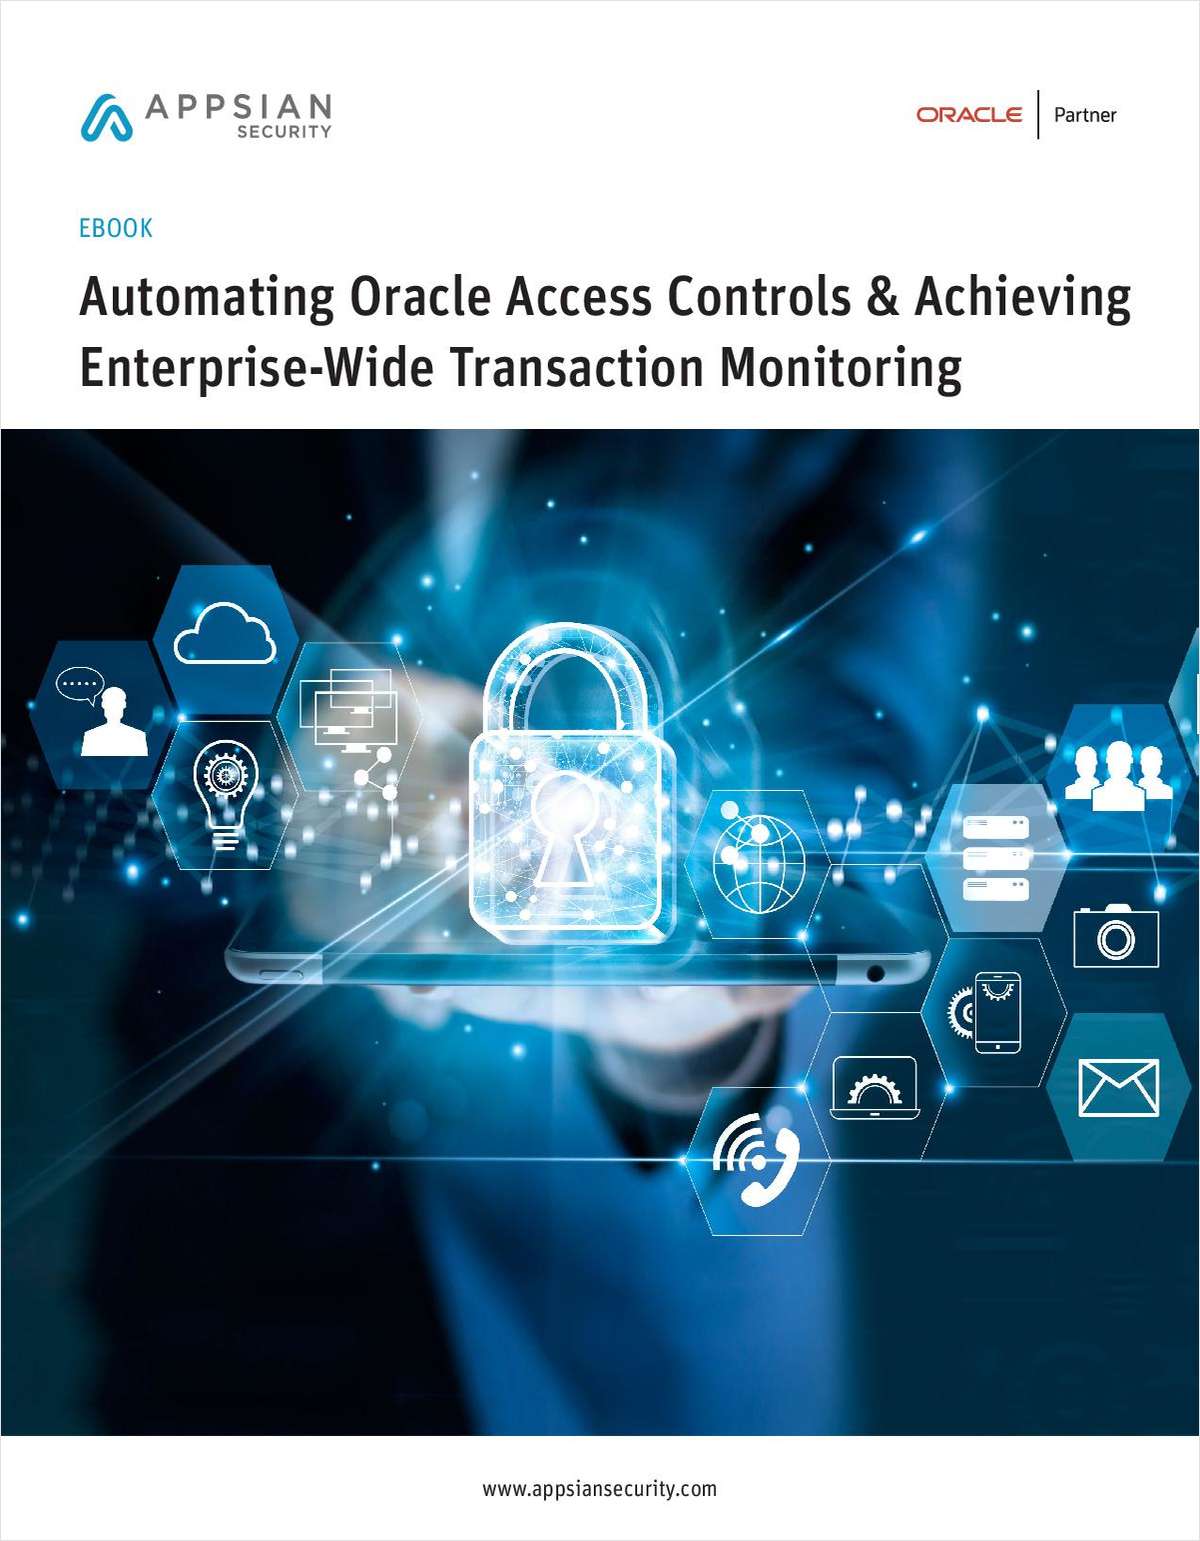 Automating Oracle Access Controls & Achieving Enterprise-Wide Transaction Monitoring